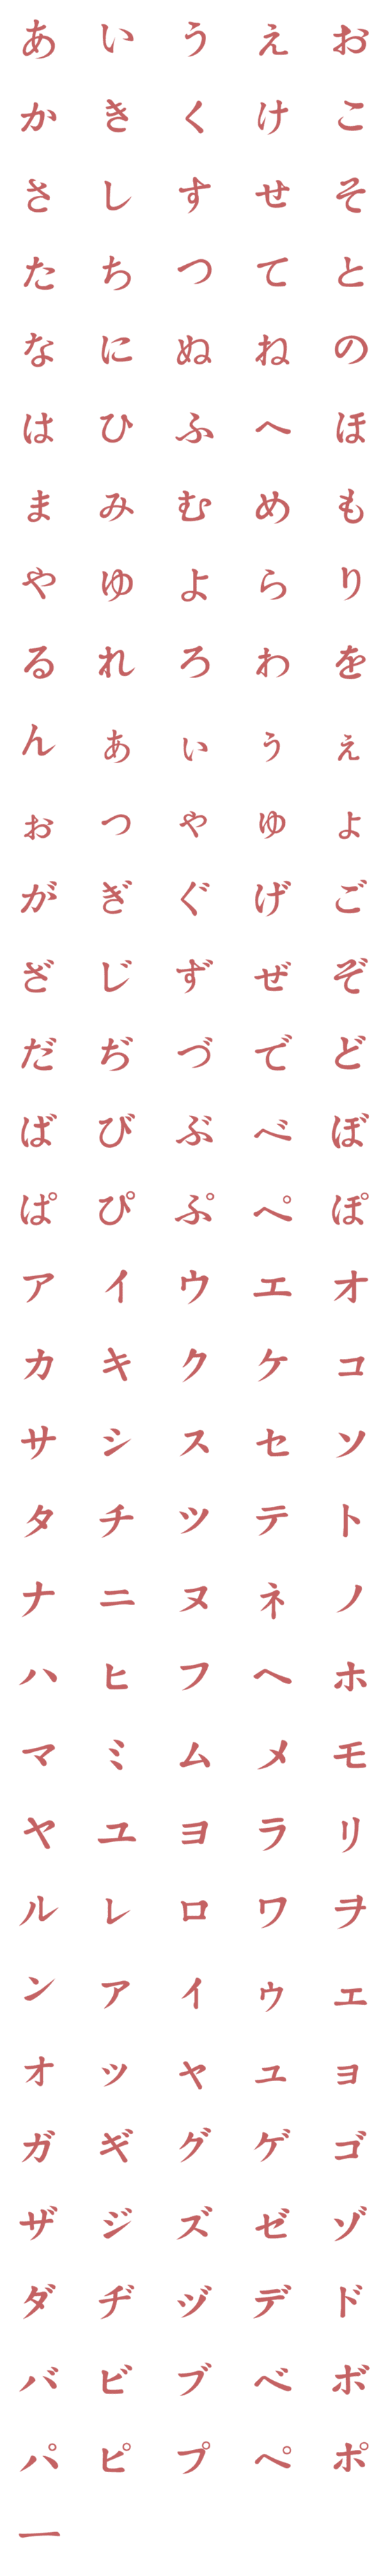 [LINE絵文字]Japanese kana for the color redの画像一覧